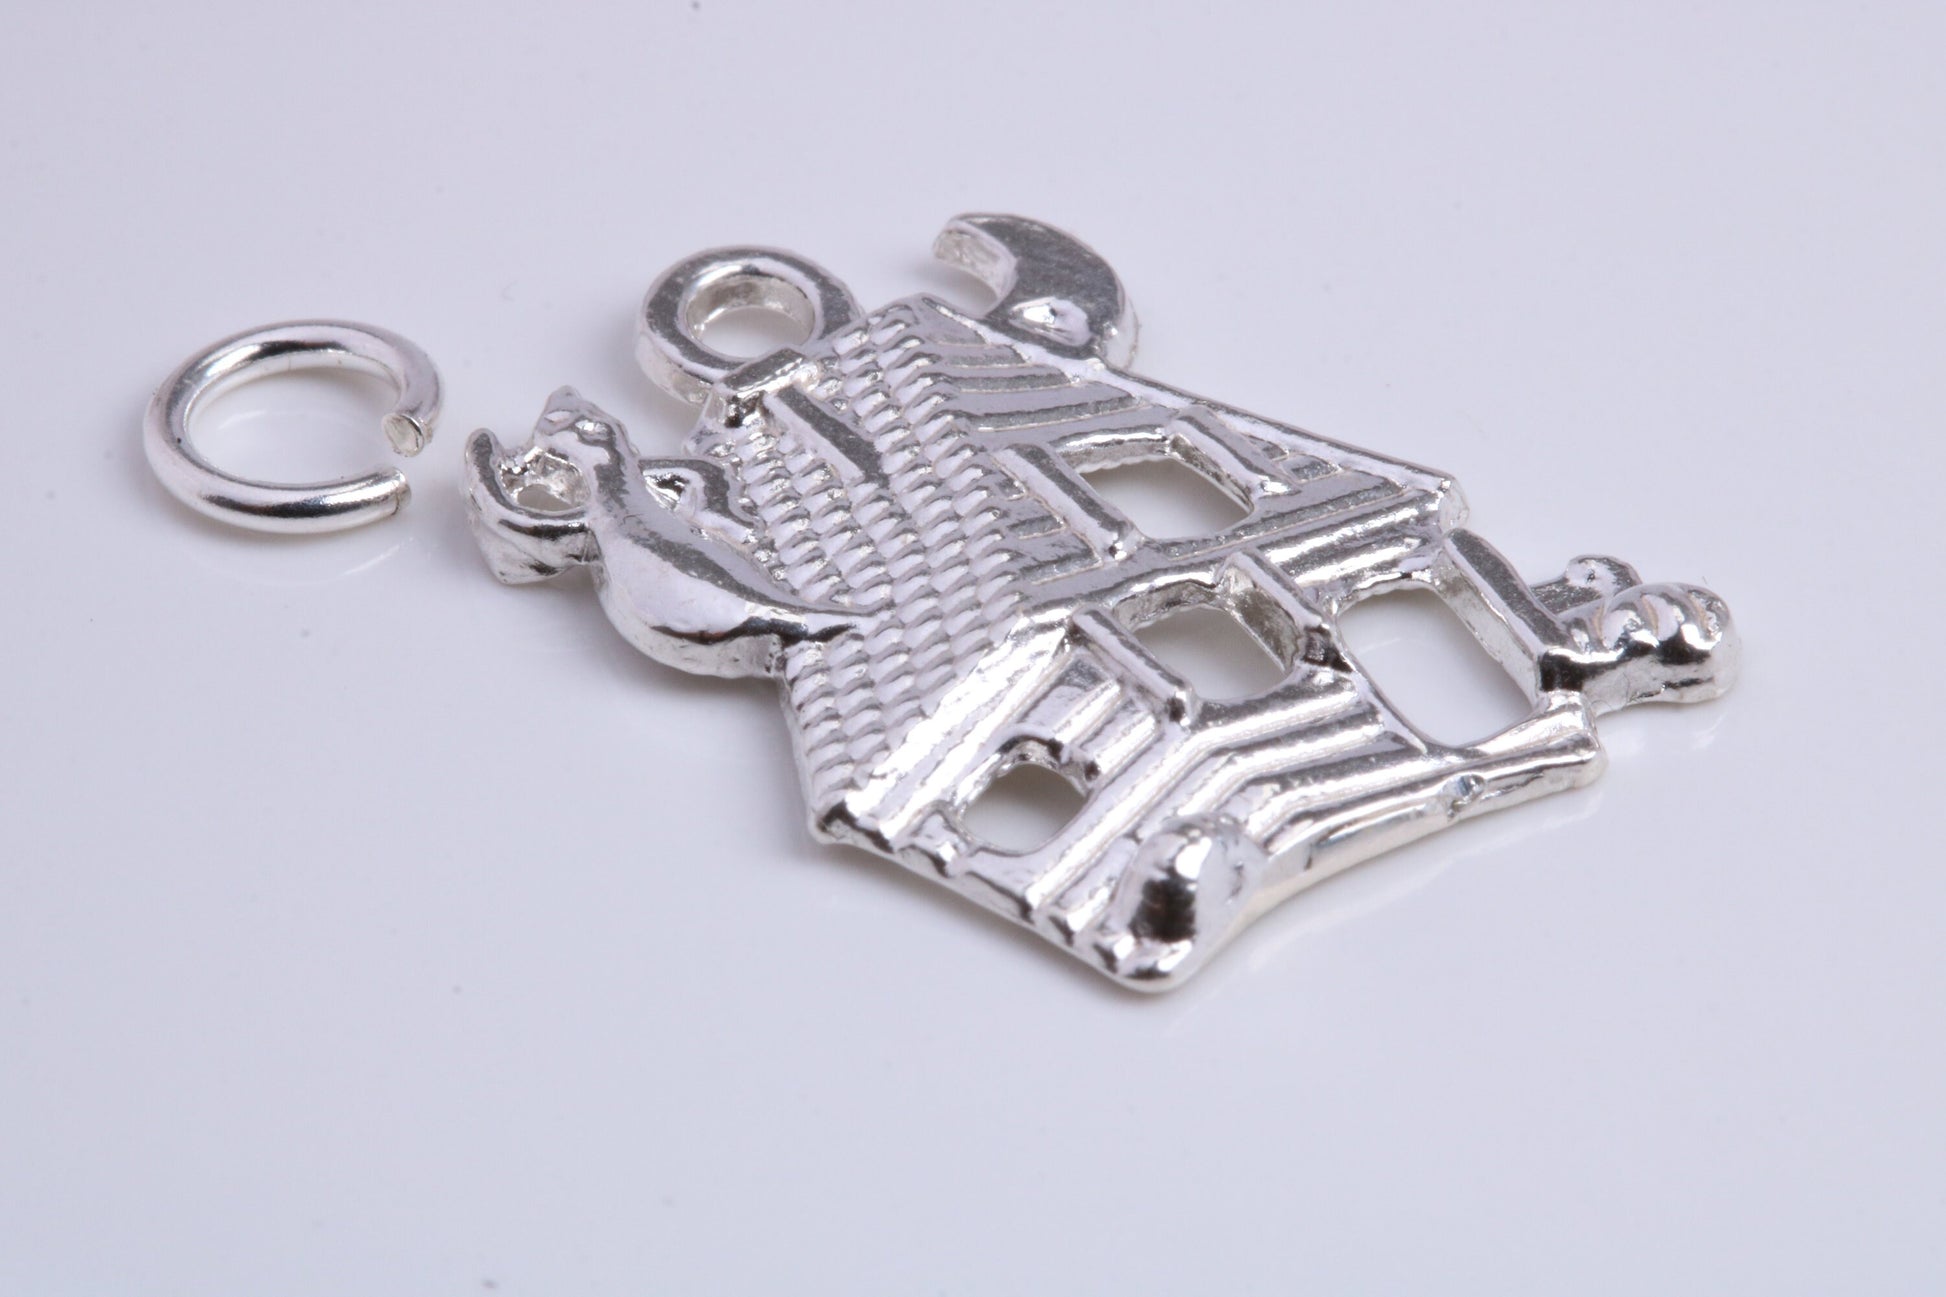 Haunted House Charm, Traditional Charm, Made from Solid 925 Grade Sterling Silver, Complete with Attachment Link